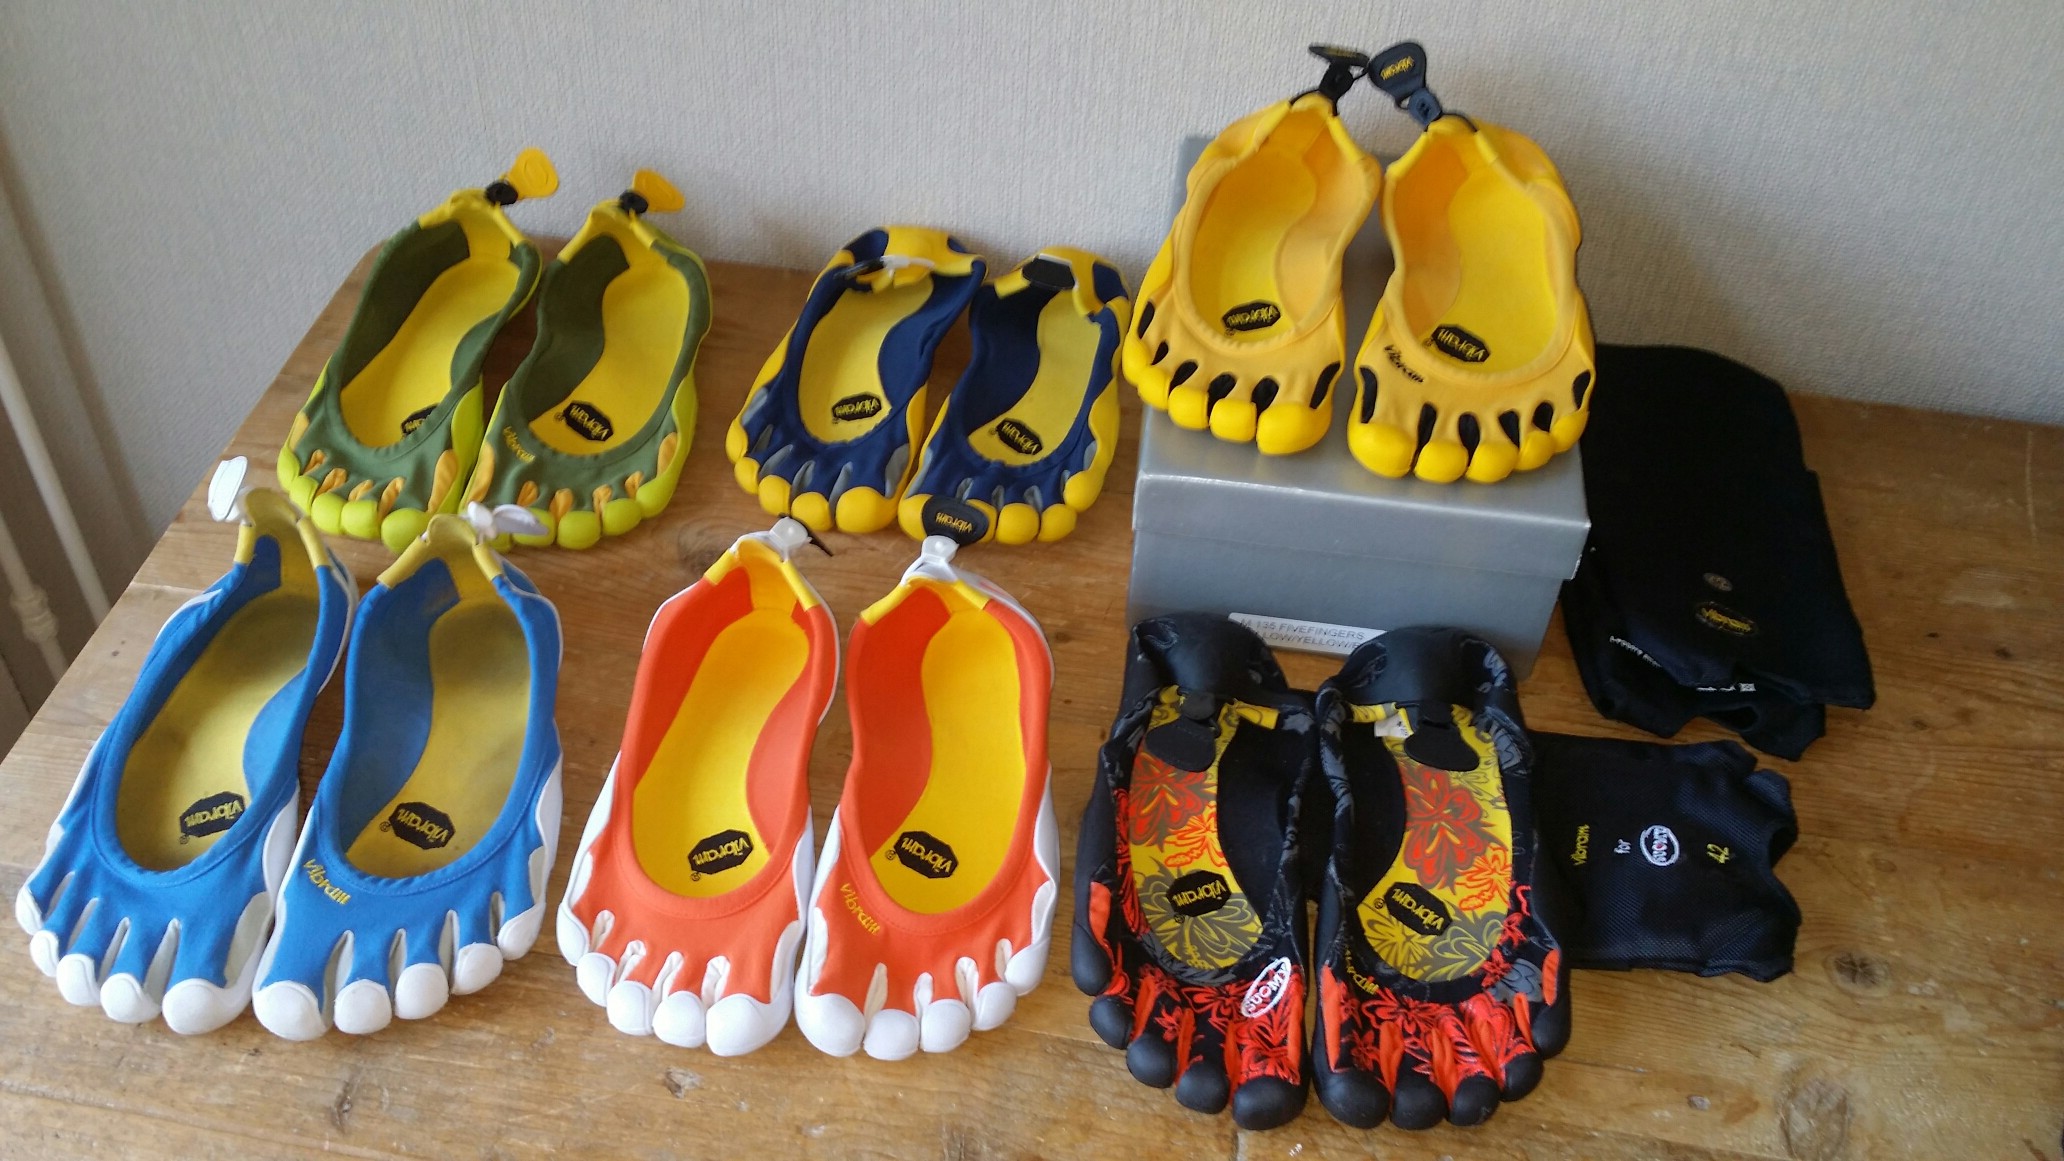 A few of the earliest-sold Vibram FiveFingers - the Classic - from my collection.